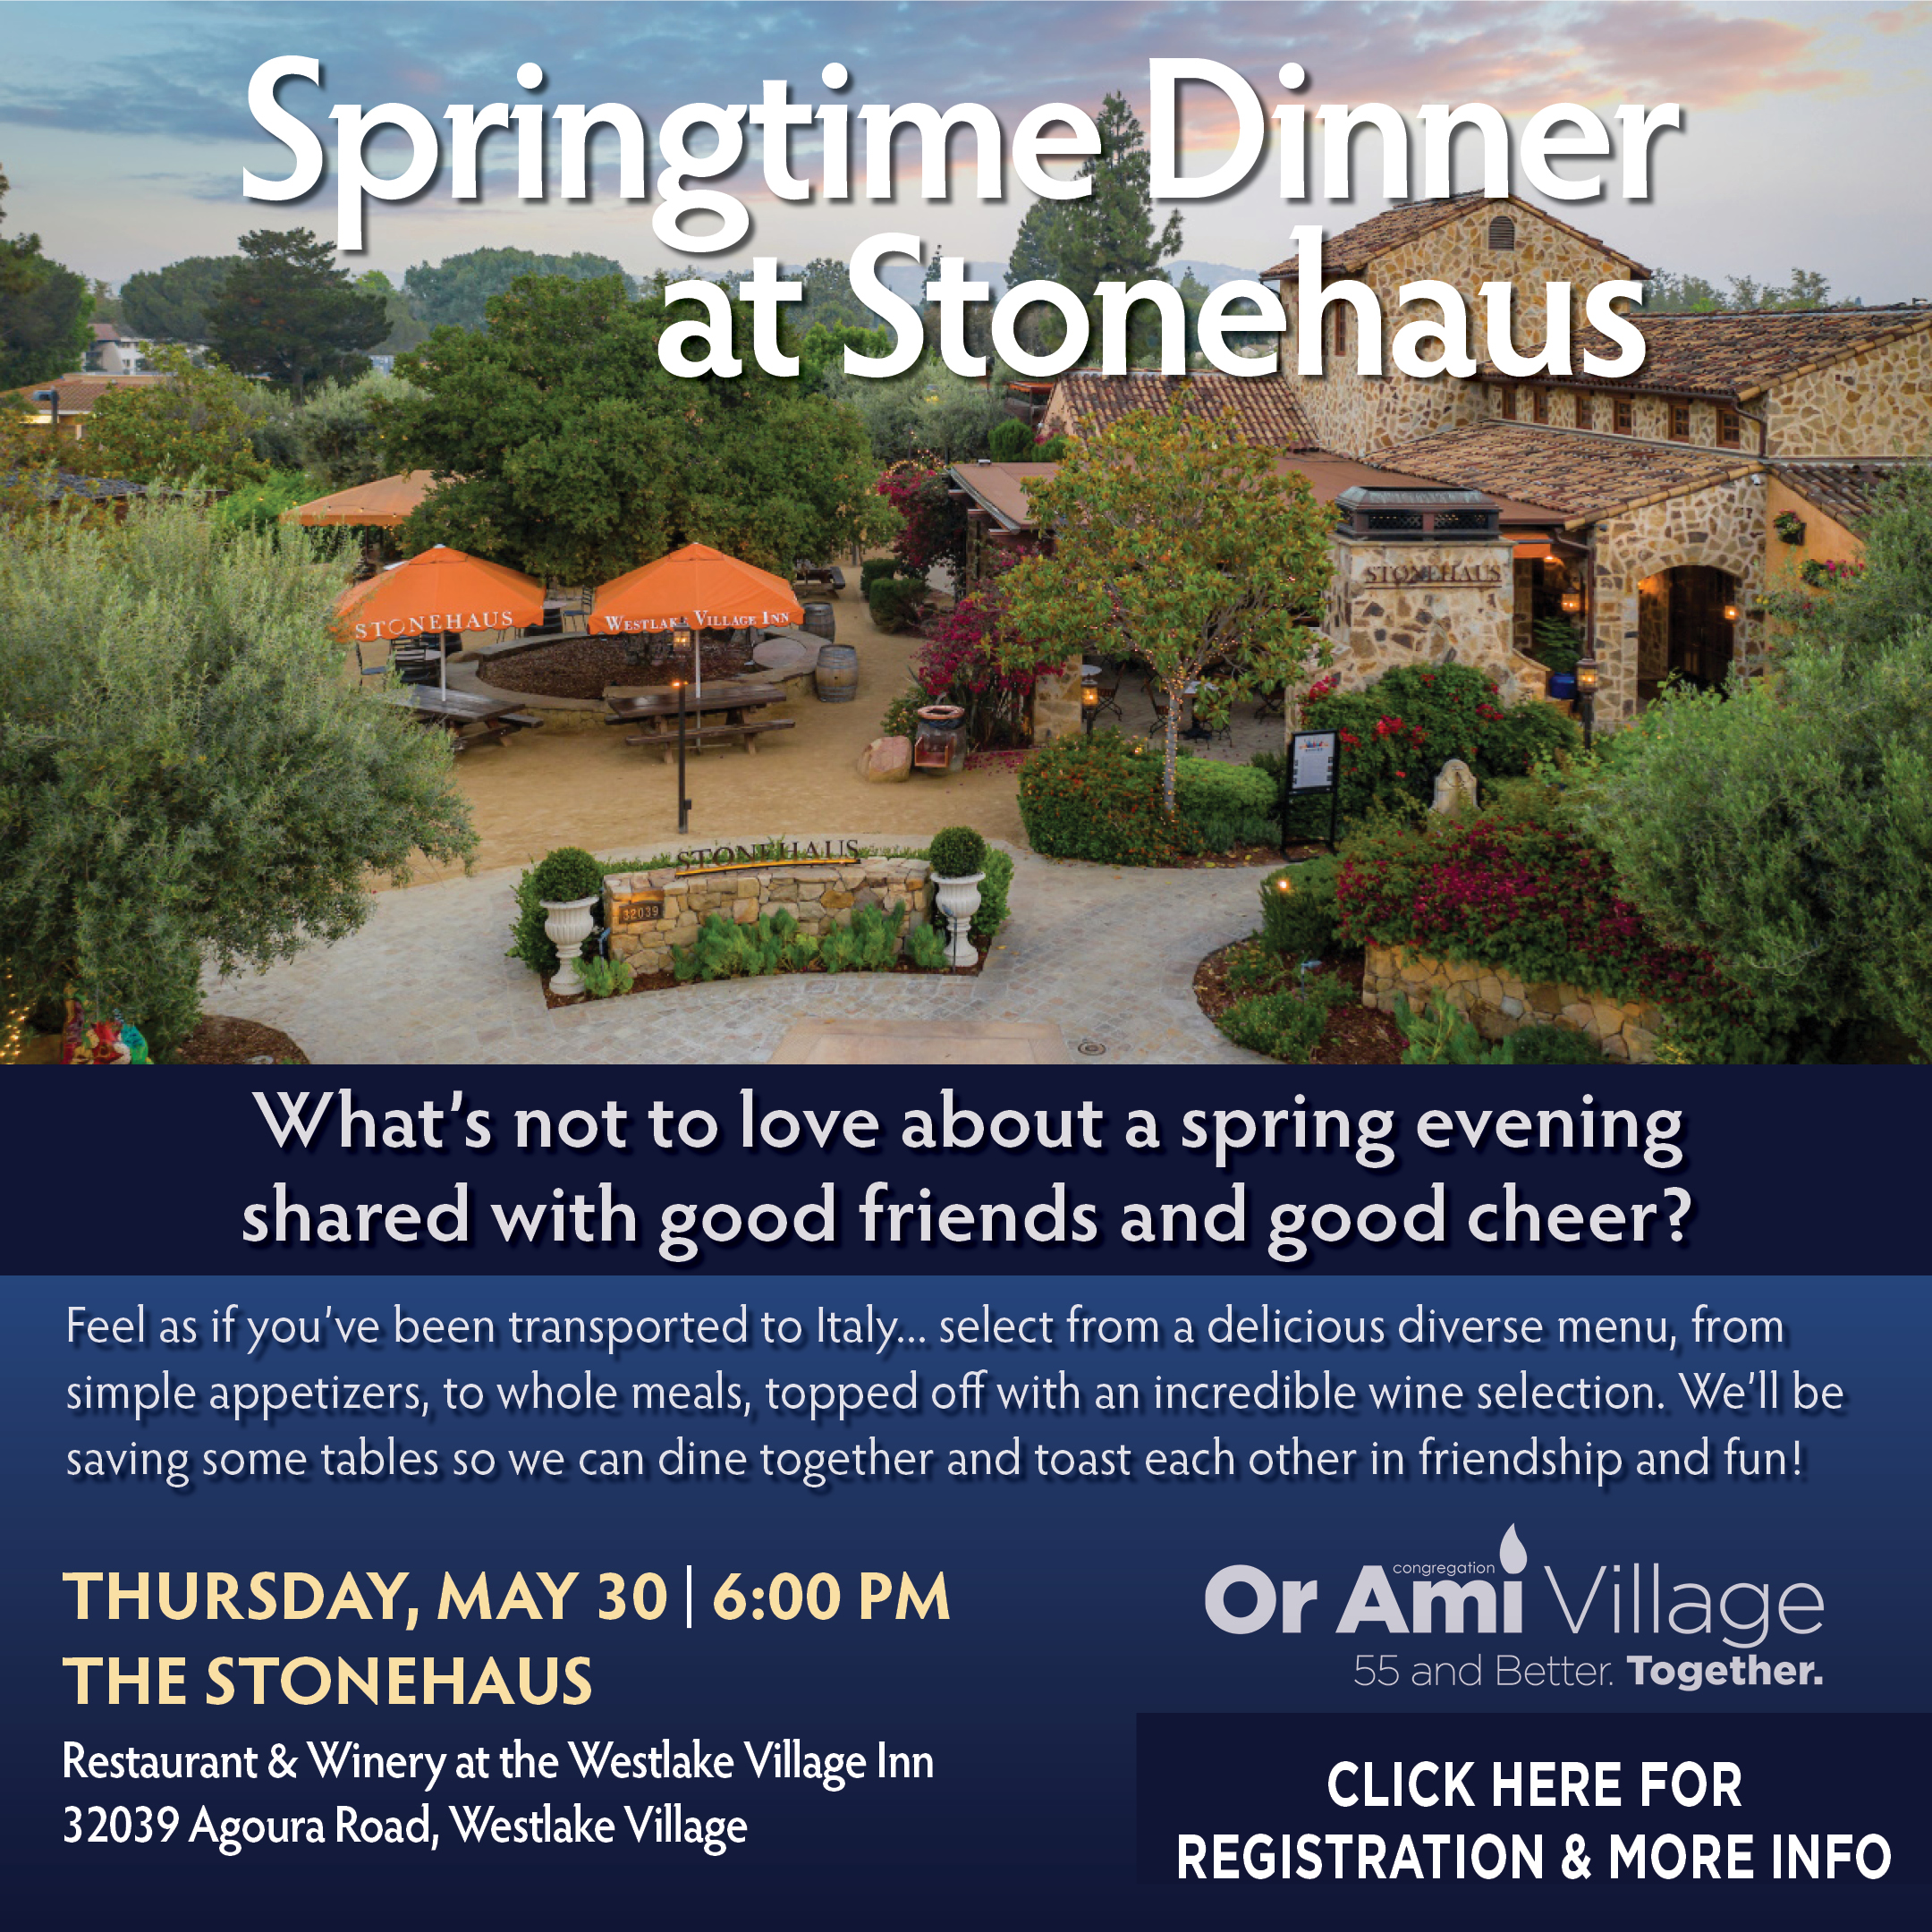 Or Ami Village - The Stonehaus in Springtime CLICK